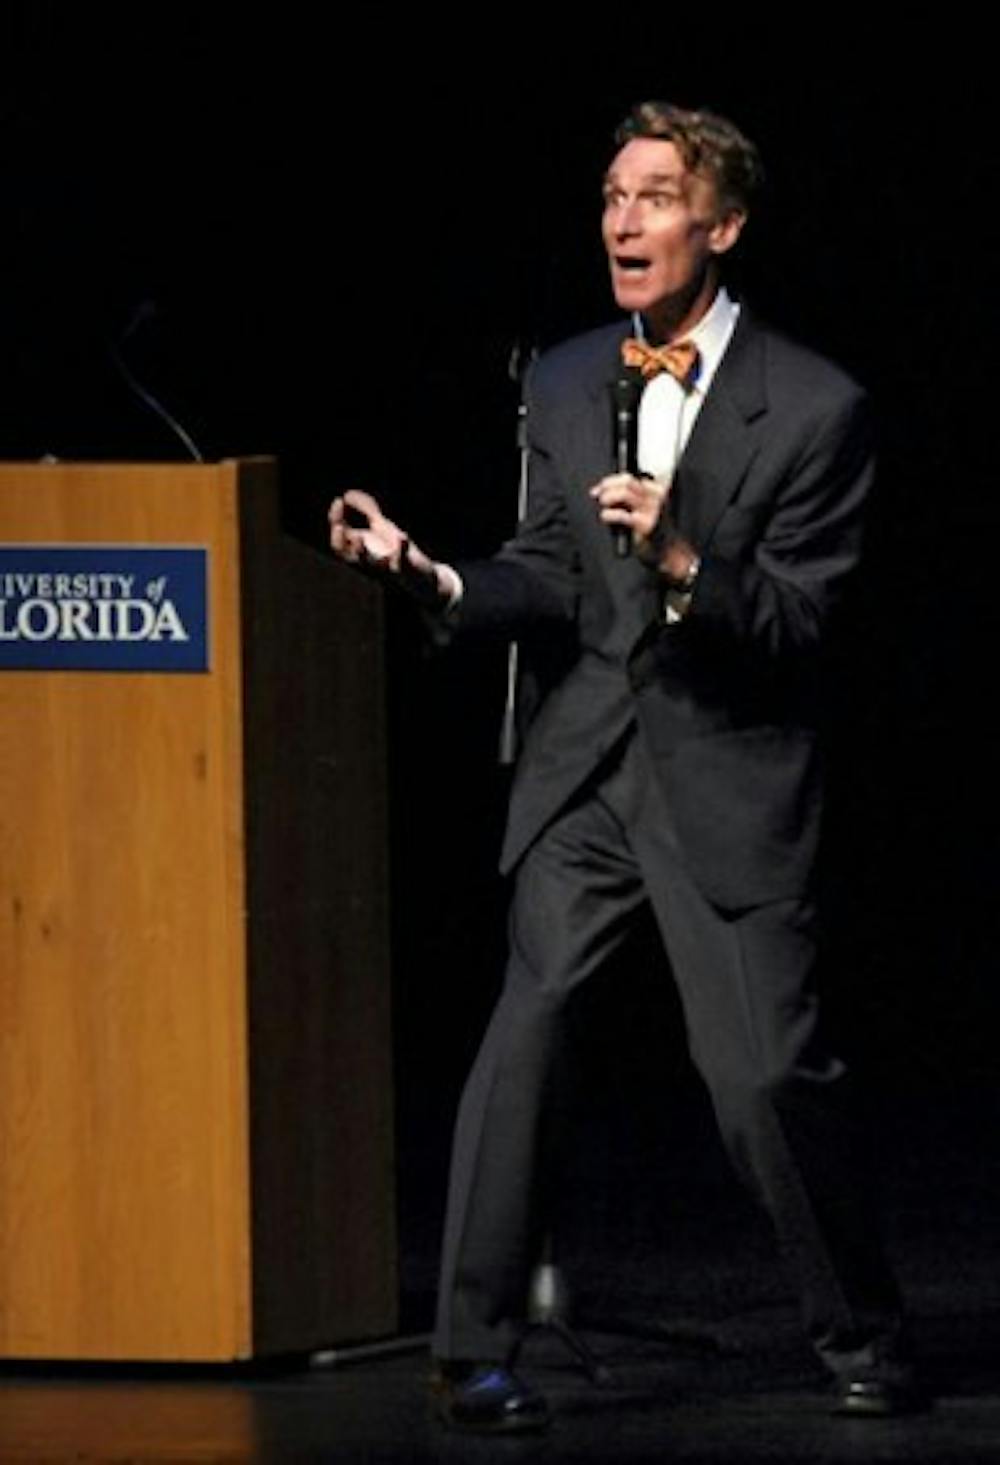 <p>(Nicole Safker / Alligator Staff) Scientist and TV personality Bill Nye gestures during his speech at the Phillips Center in 2007.</p>